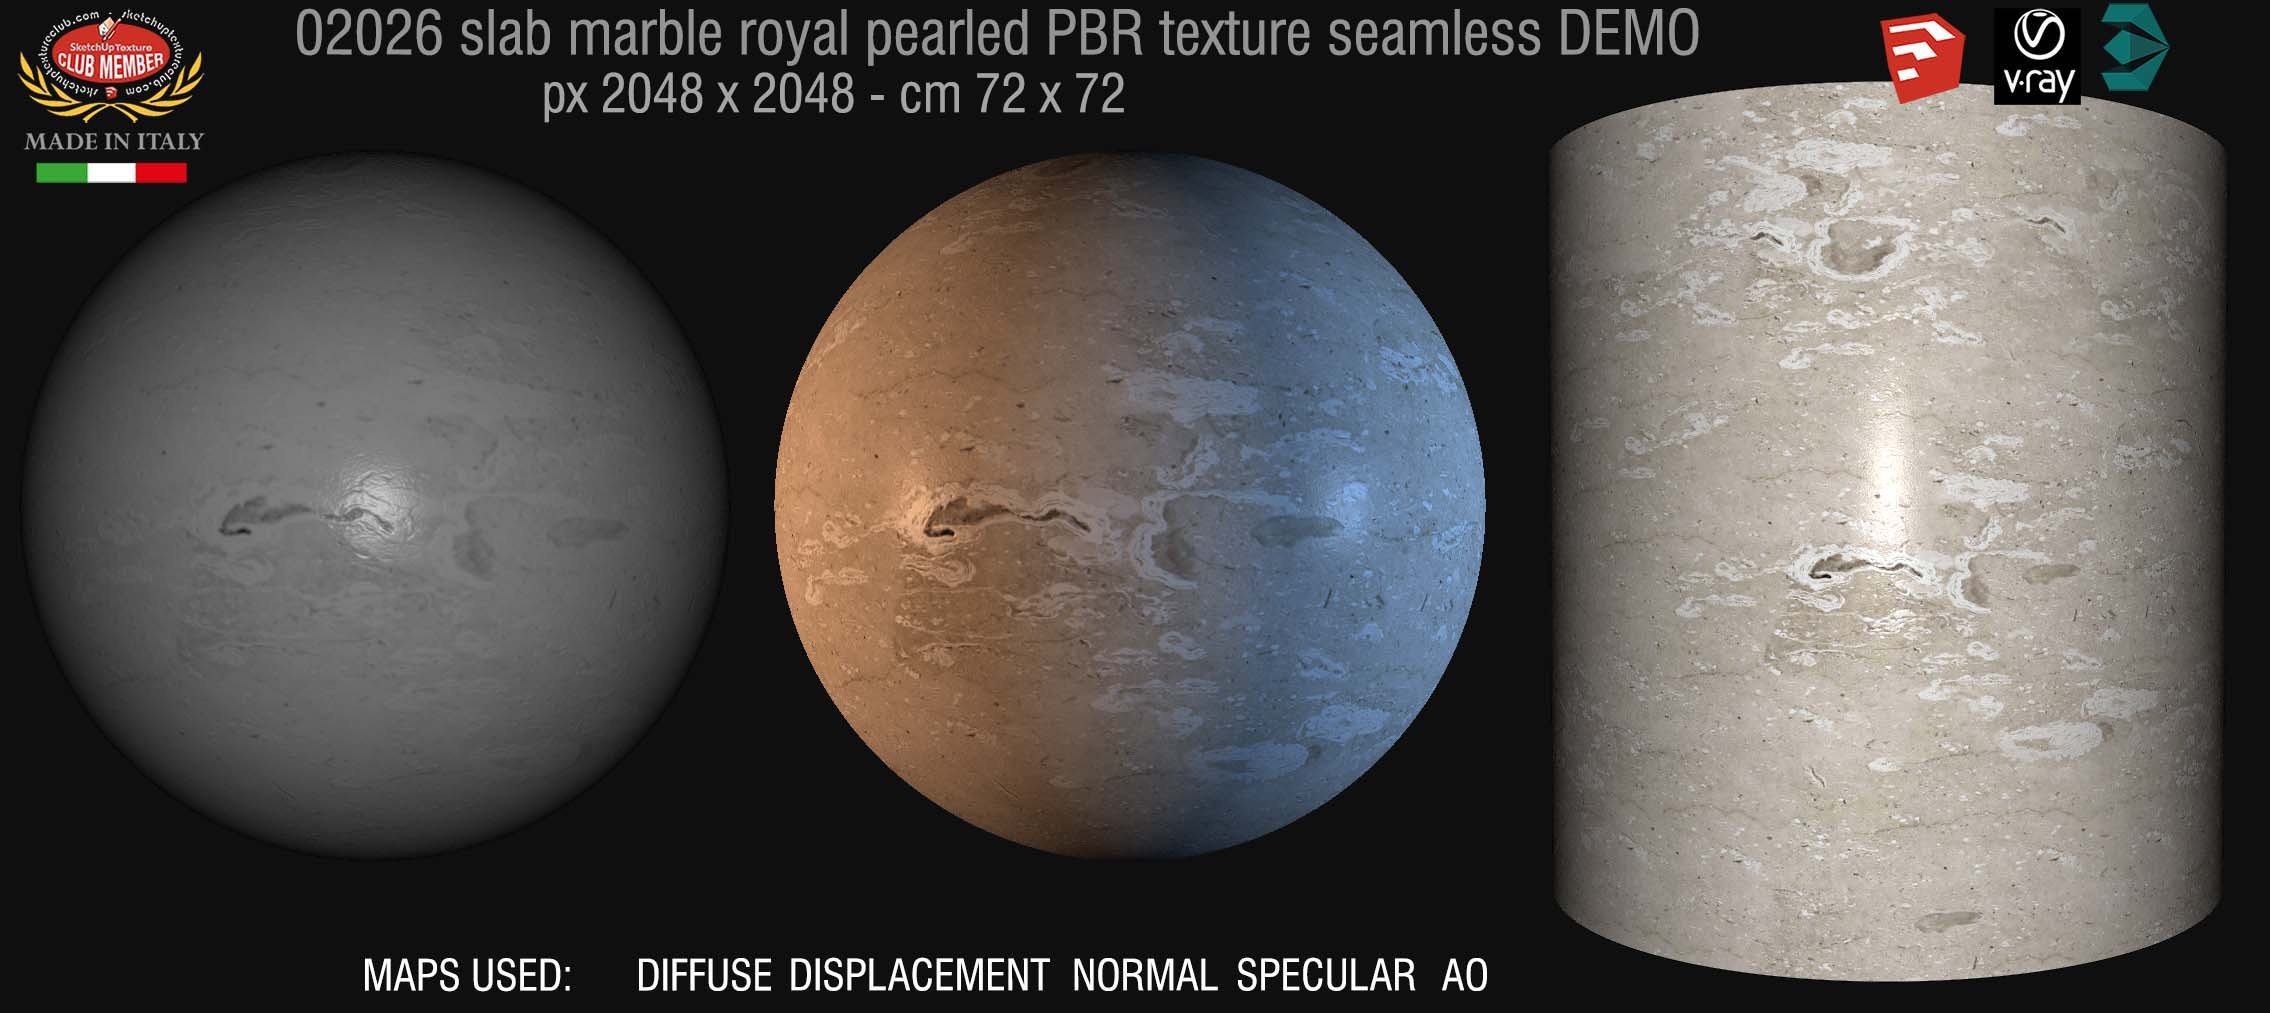 02026 slab marble royal pearled PBR texture seamless DEMO